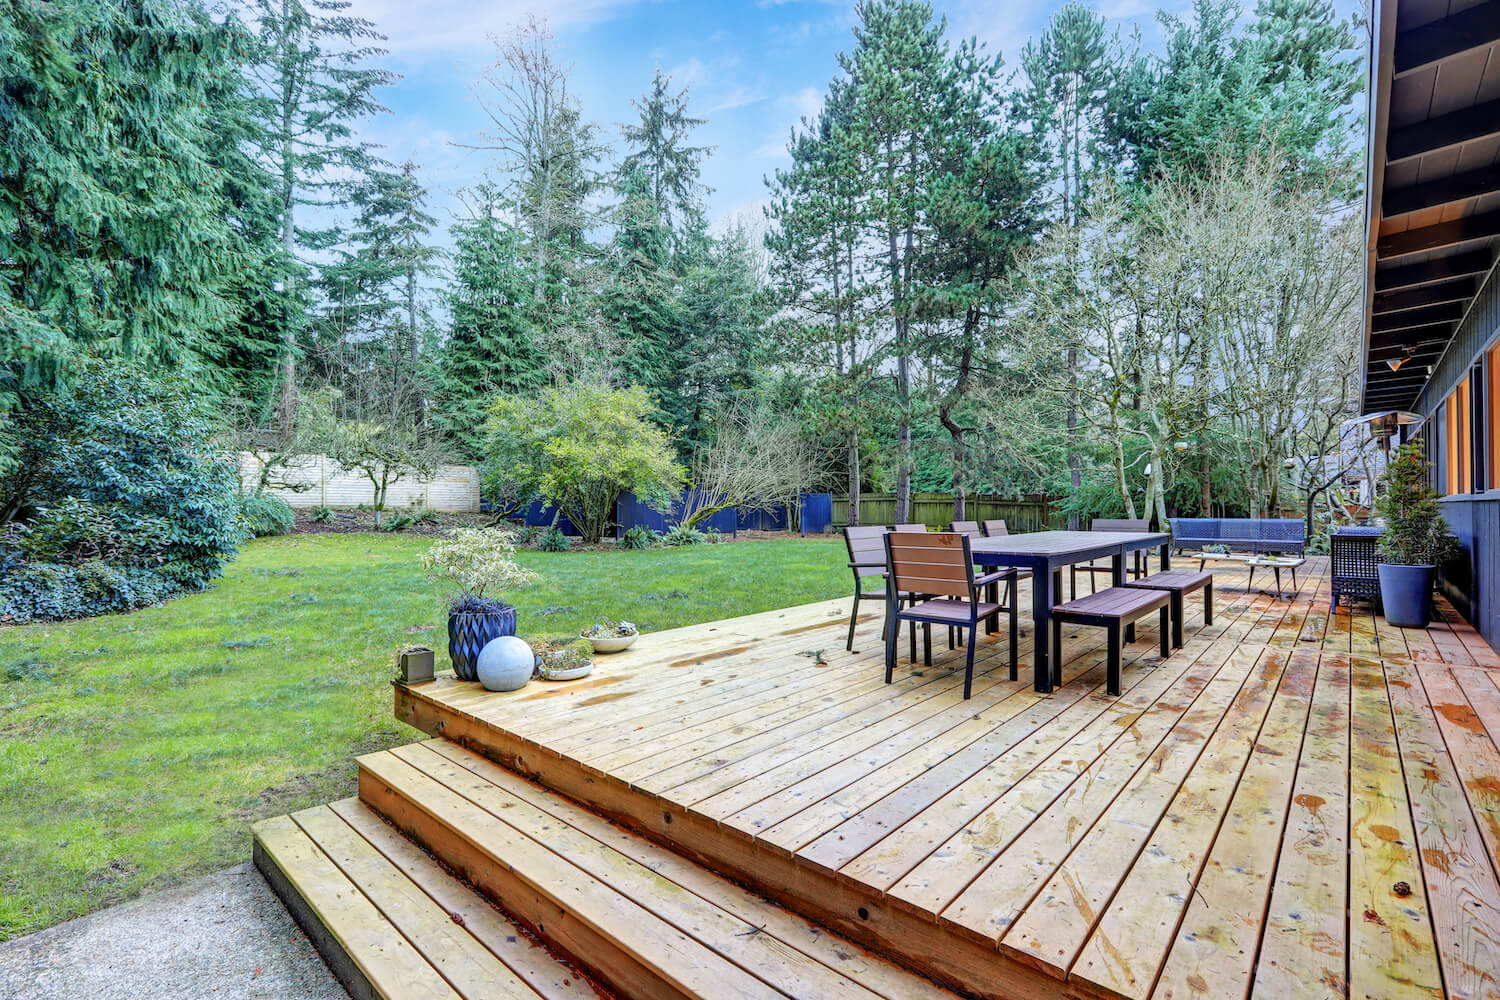 best ways to maintain the beauty of your custom deck maintain cleaning service repair damage snow job home perfect